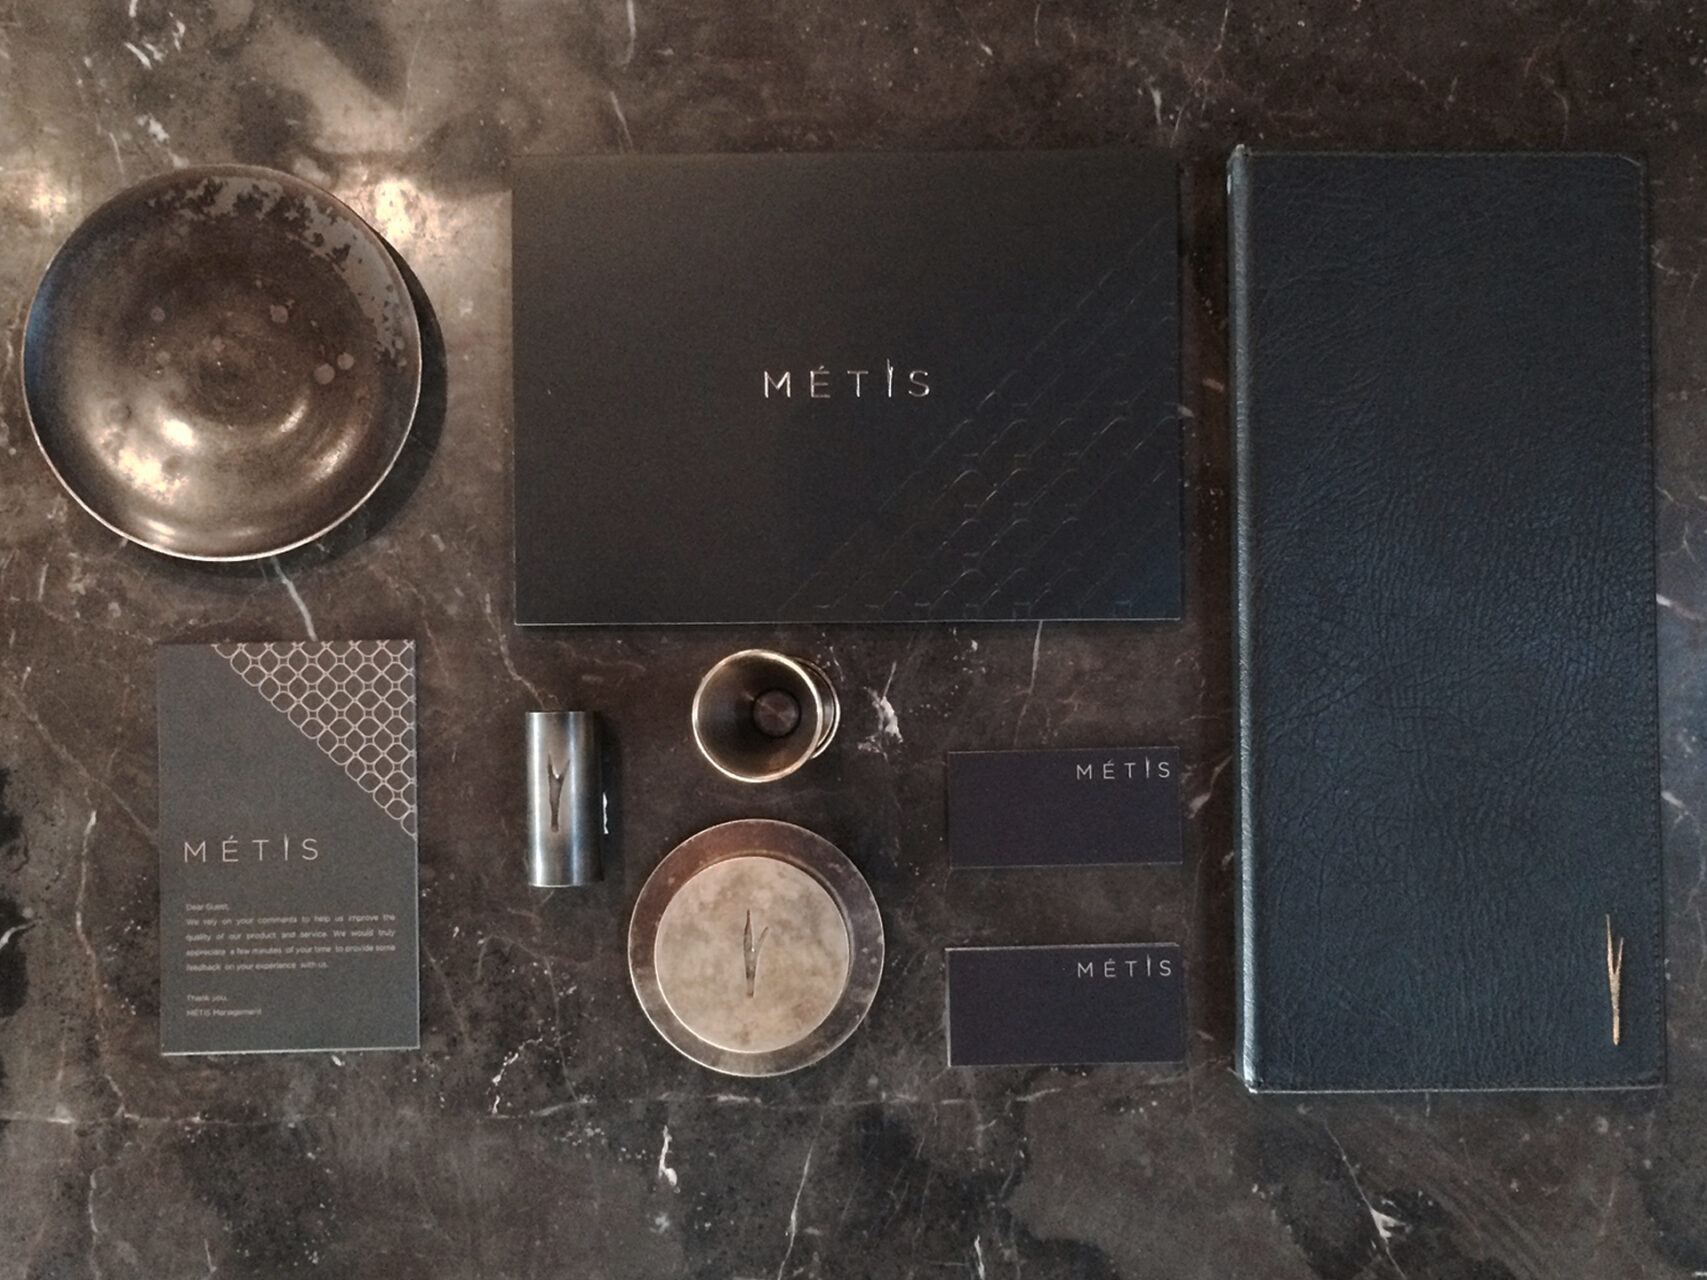 GEE for METIS Bali restaurant collateral